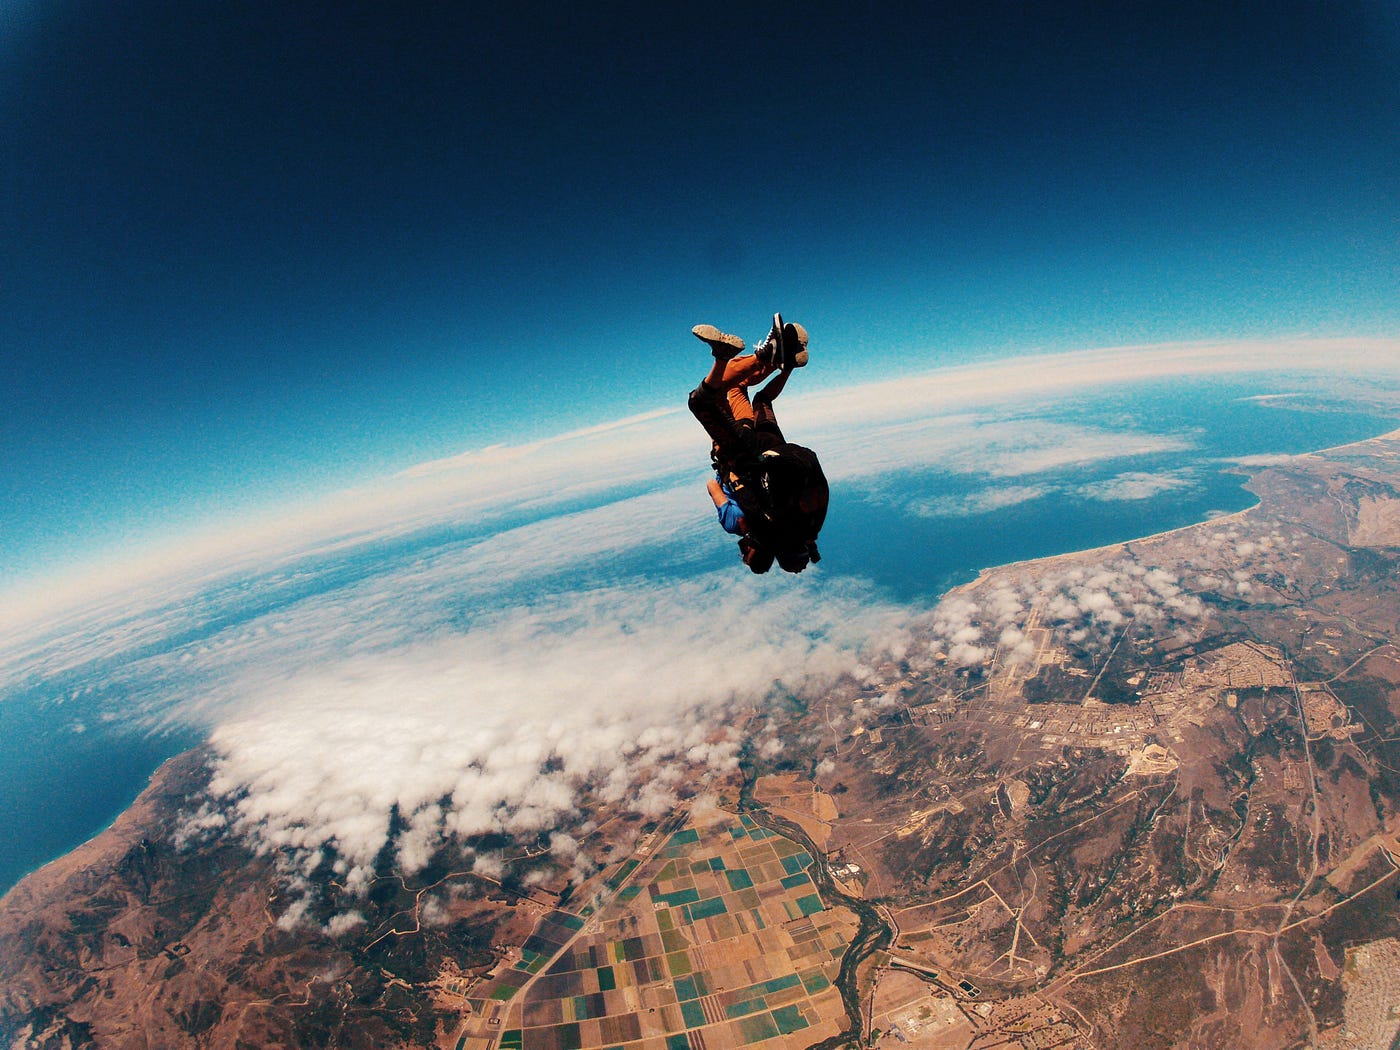 A photo of someone skydiving